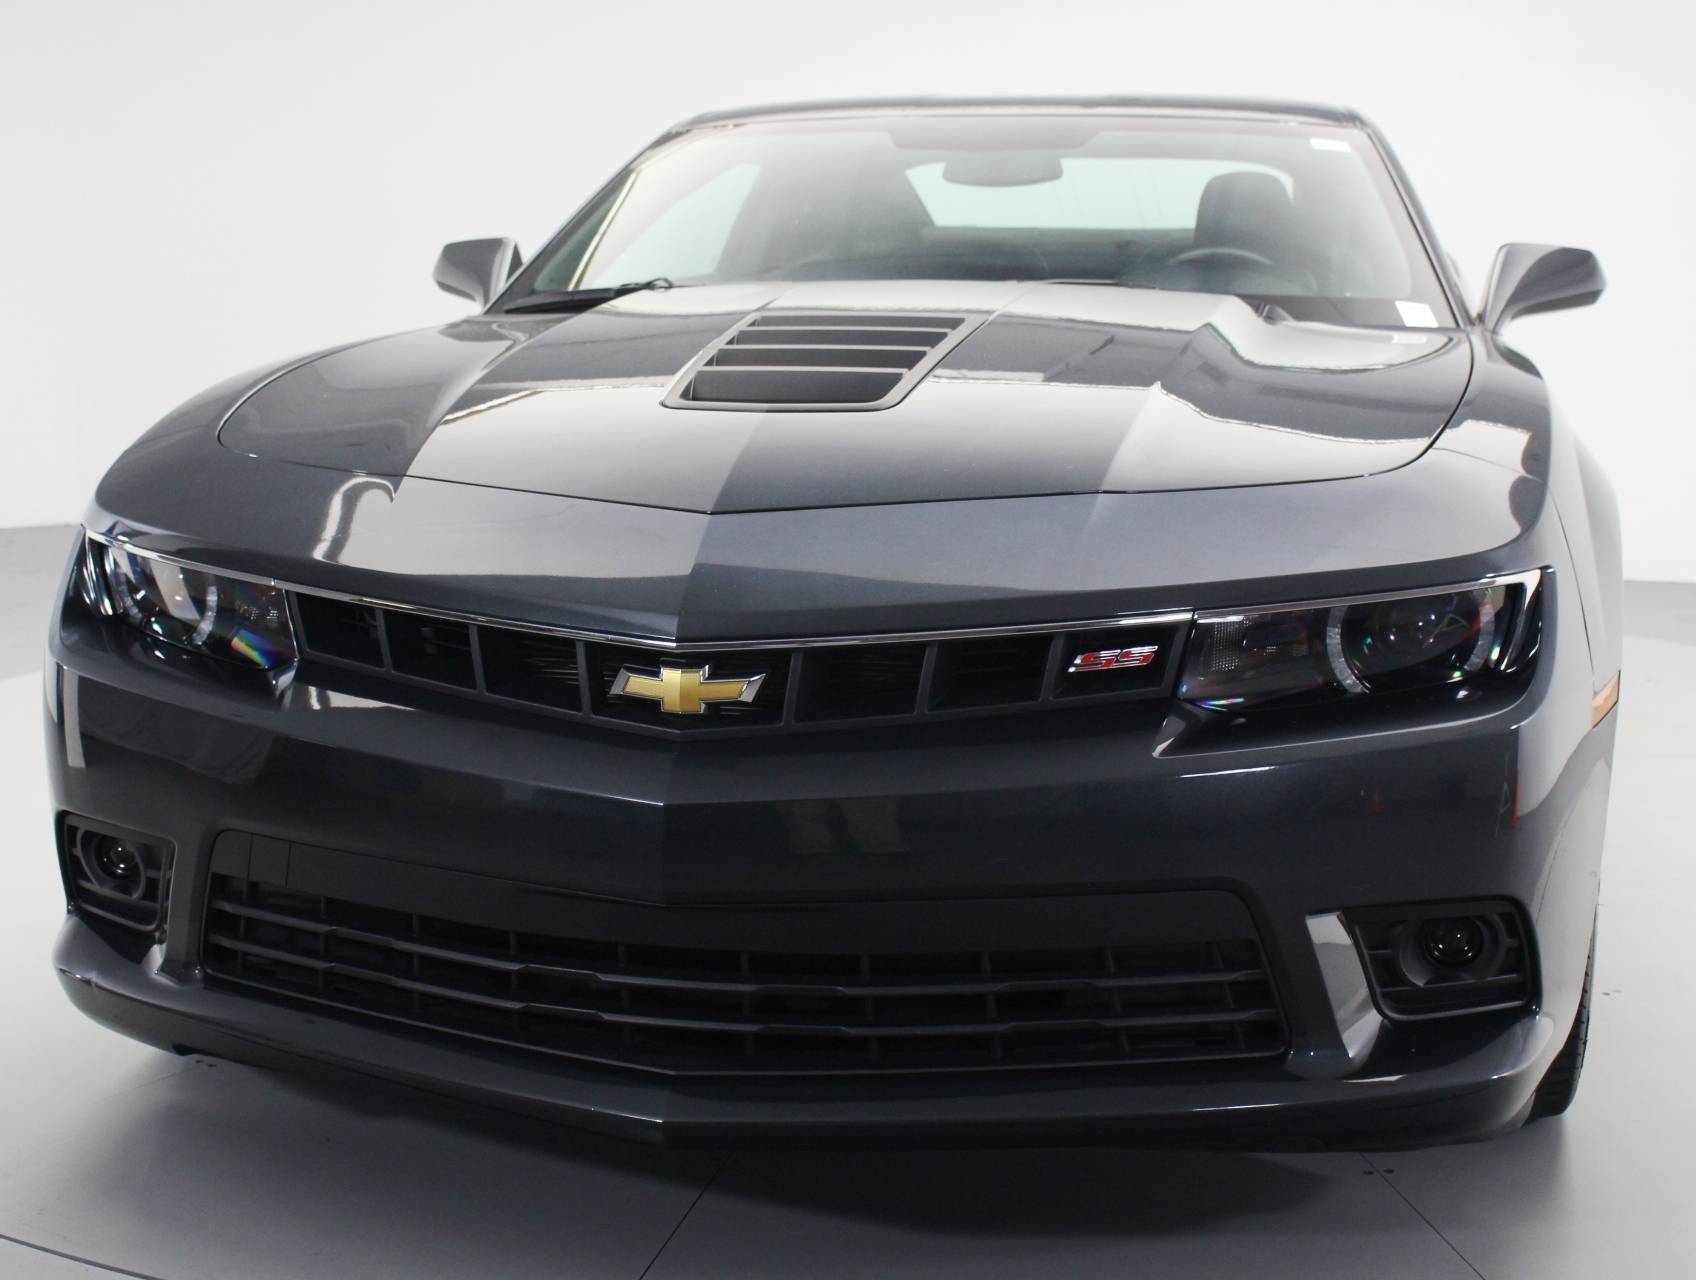 Florida Fine Cars - Used CHEVROLET CAMARO 2015 WEST PALM 1SS